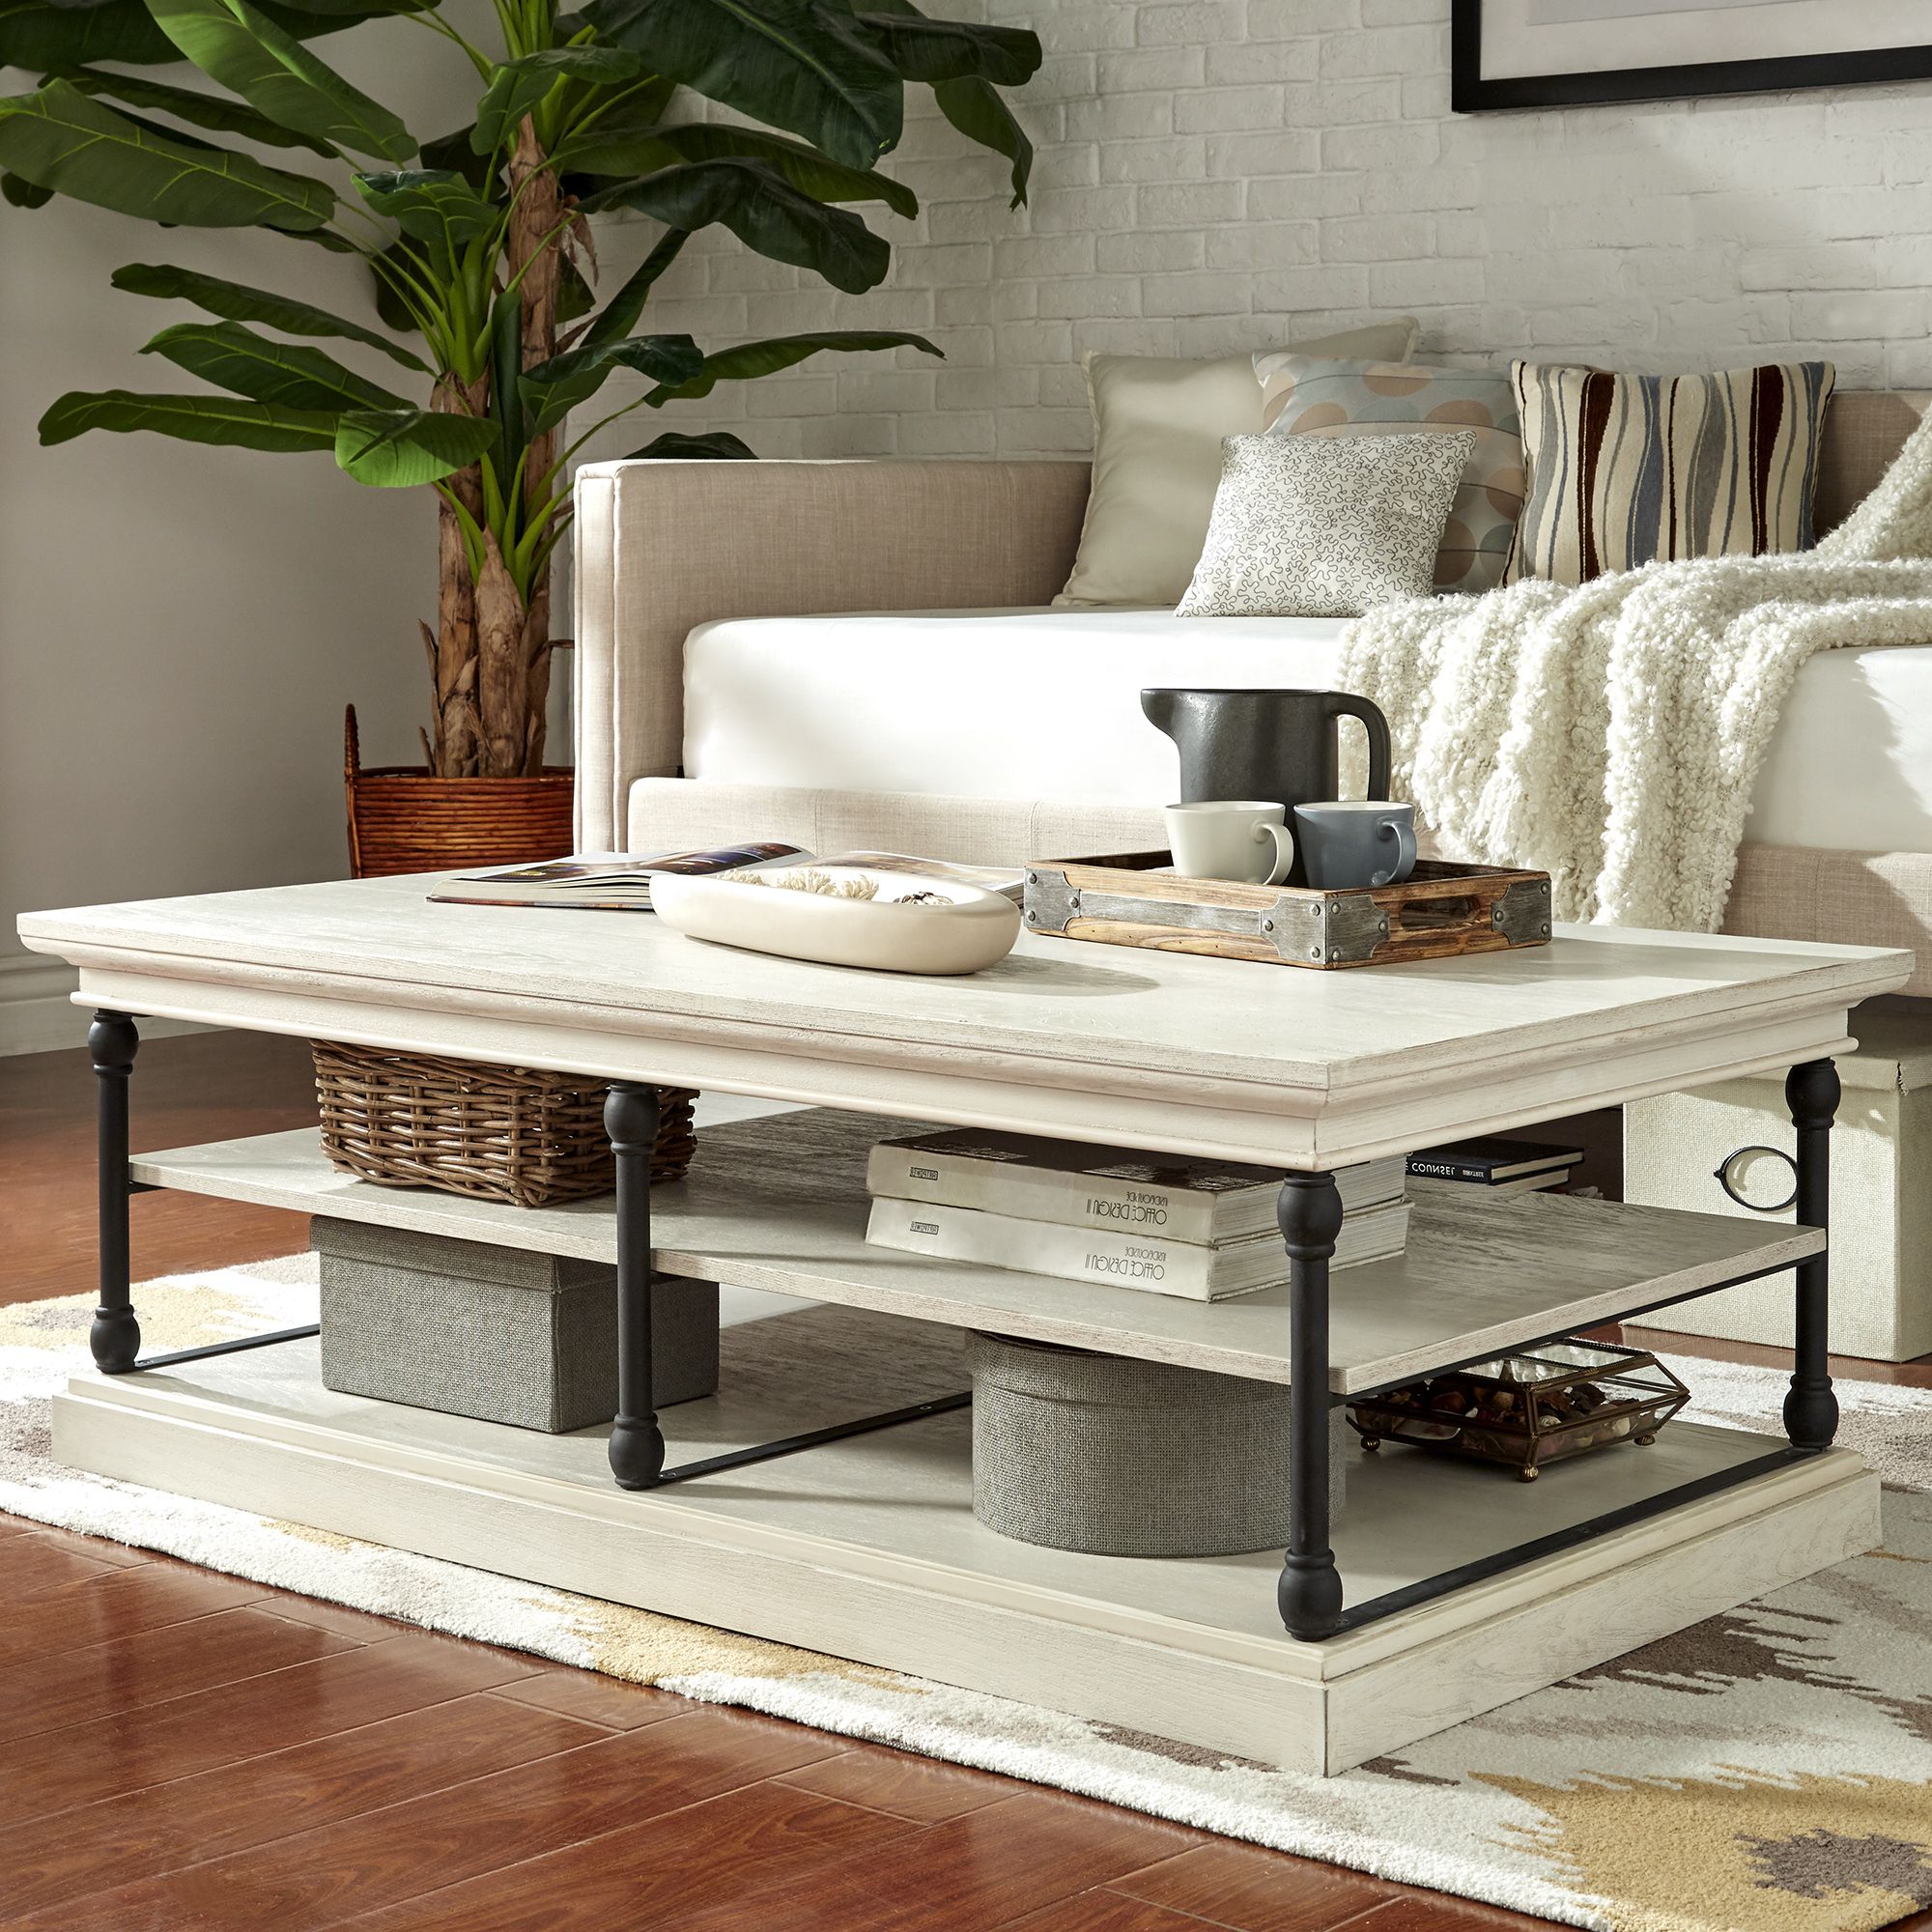 Cornice Rectangle Storage Shelf Coffee Table – Antique Whiteinspire Throughout Well Known Square Weathered White Wood Coffee Tables (View 2 of 10)